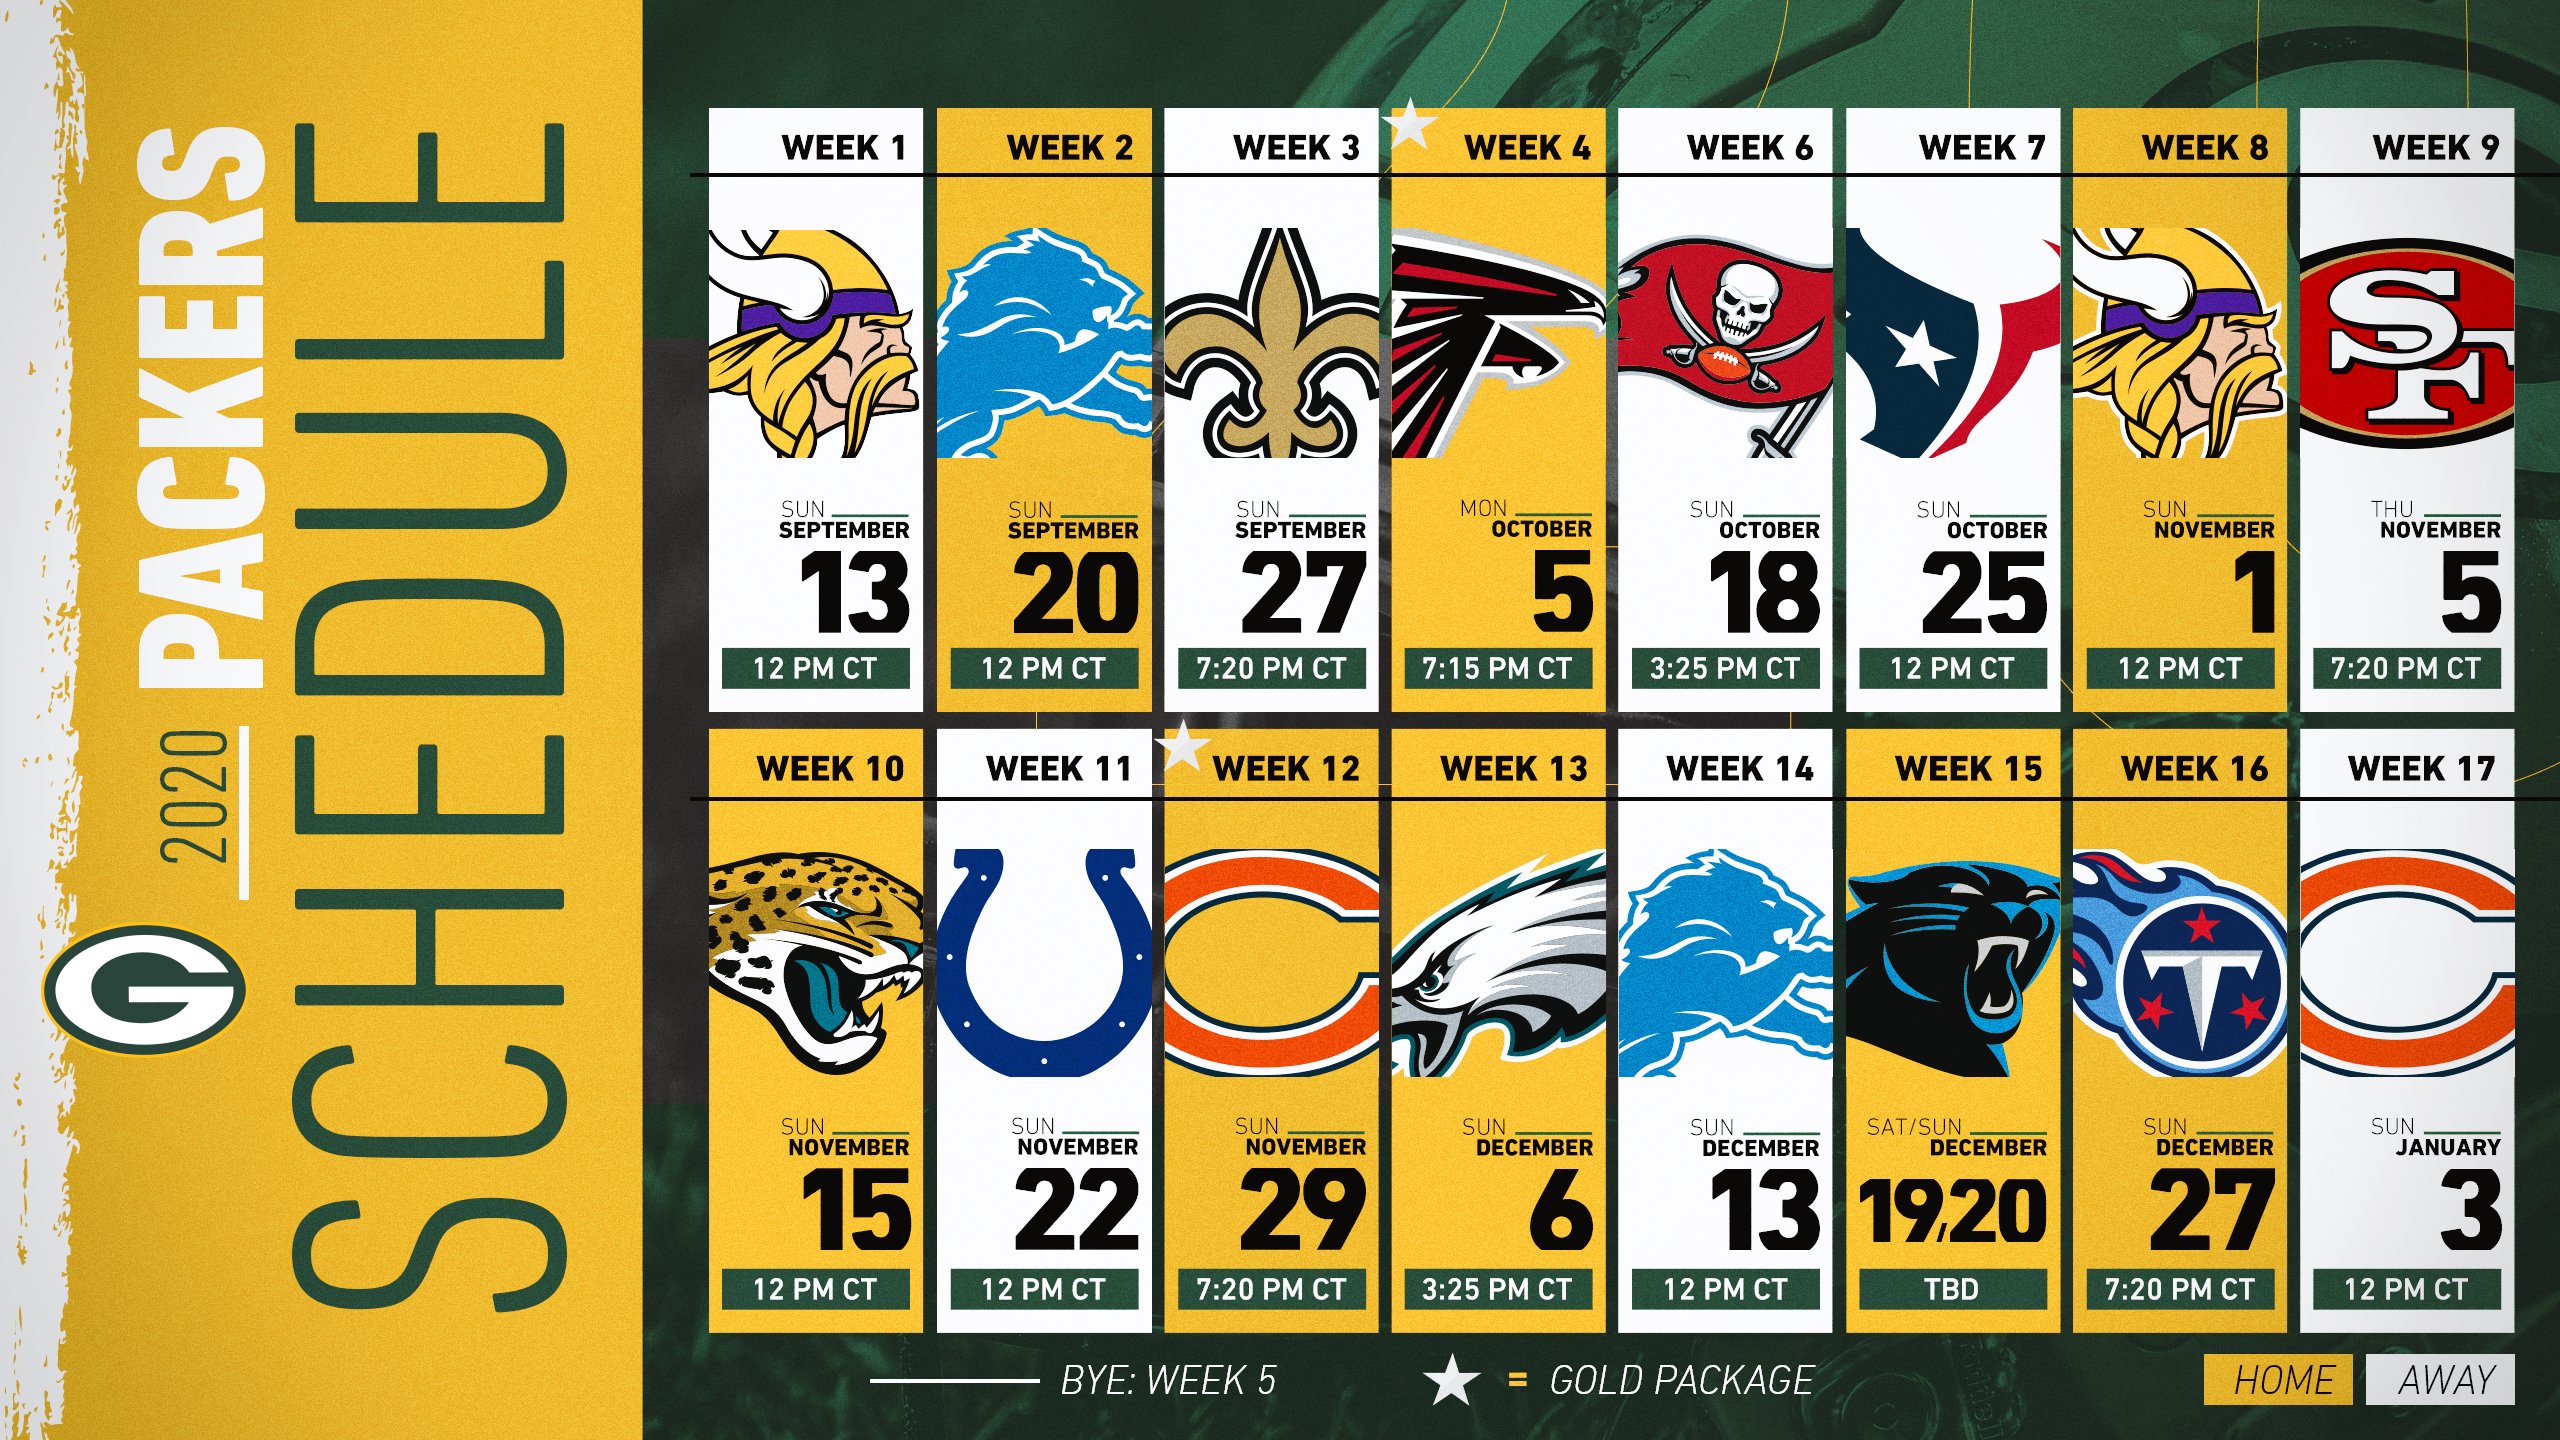 Green Bay Packers On Twitter The 2020 Packers Schedule Is Here Https T Co 11lbdmqvew Gopackgo